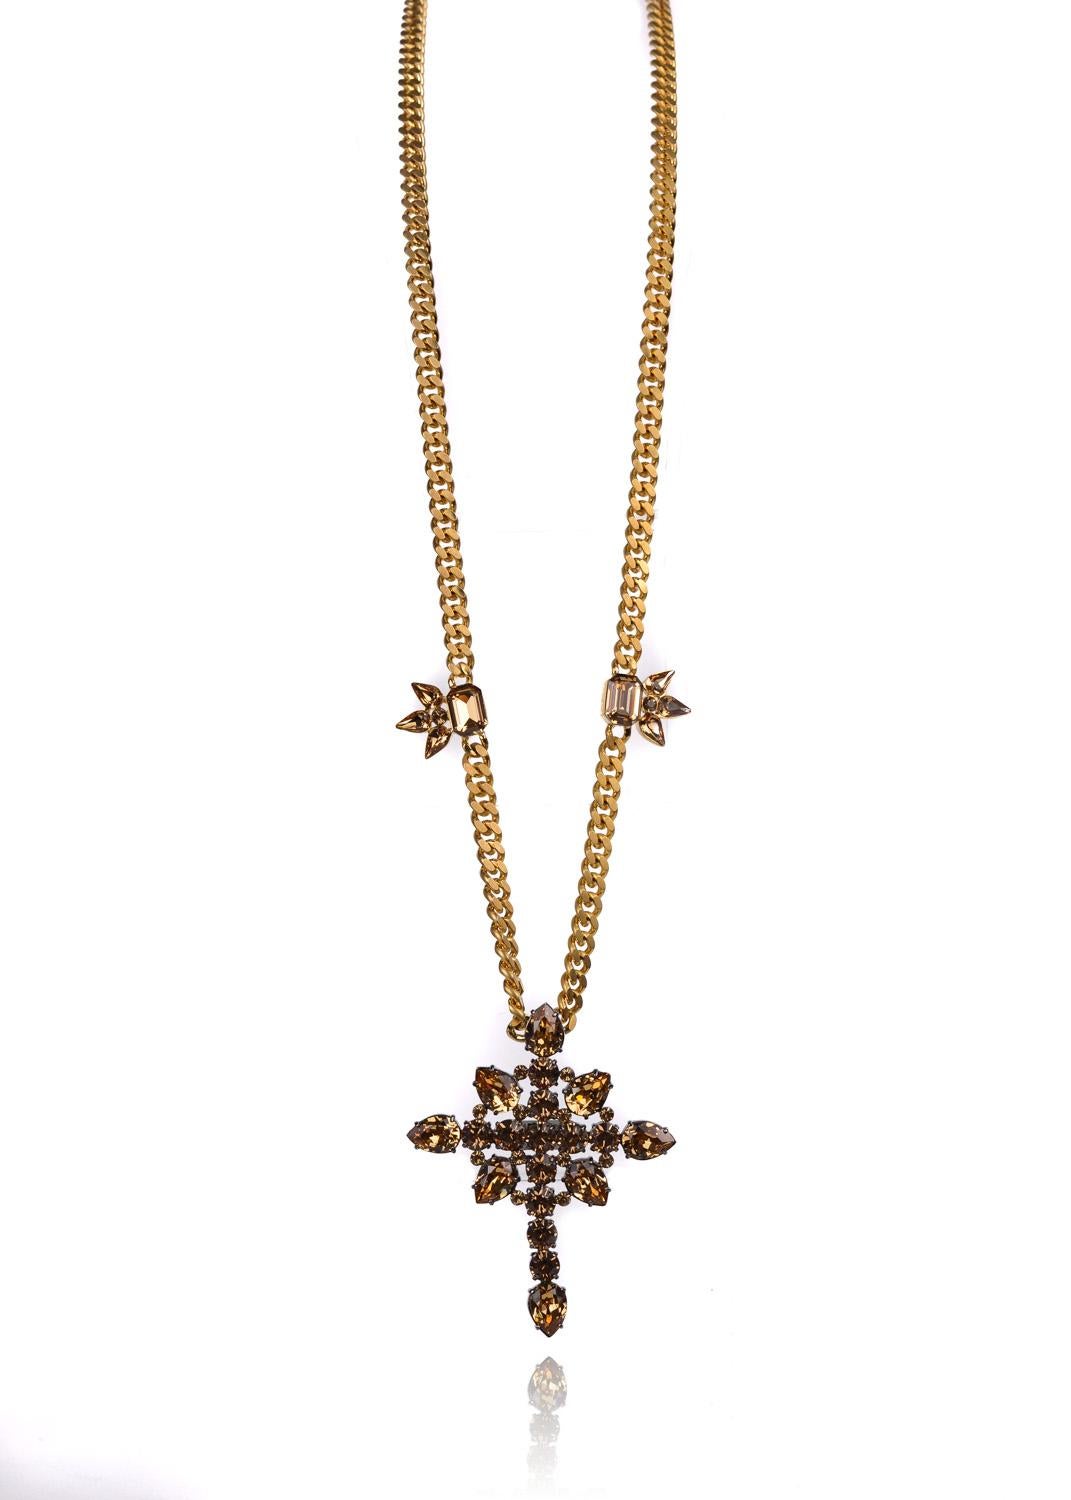 Treat yourself to Roberto Cavalli's divine creation with this Cuban Curb Cross Necklace. Roberto Cavalli's highly skilled artistry features durable gold cuban curb links, brown tinted glacial reminiscint Swarovski Crystals, and Swarovski secured